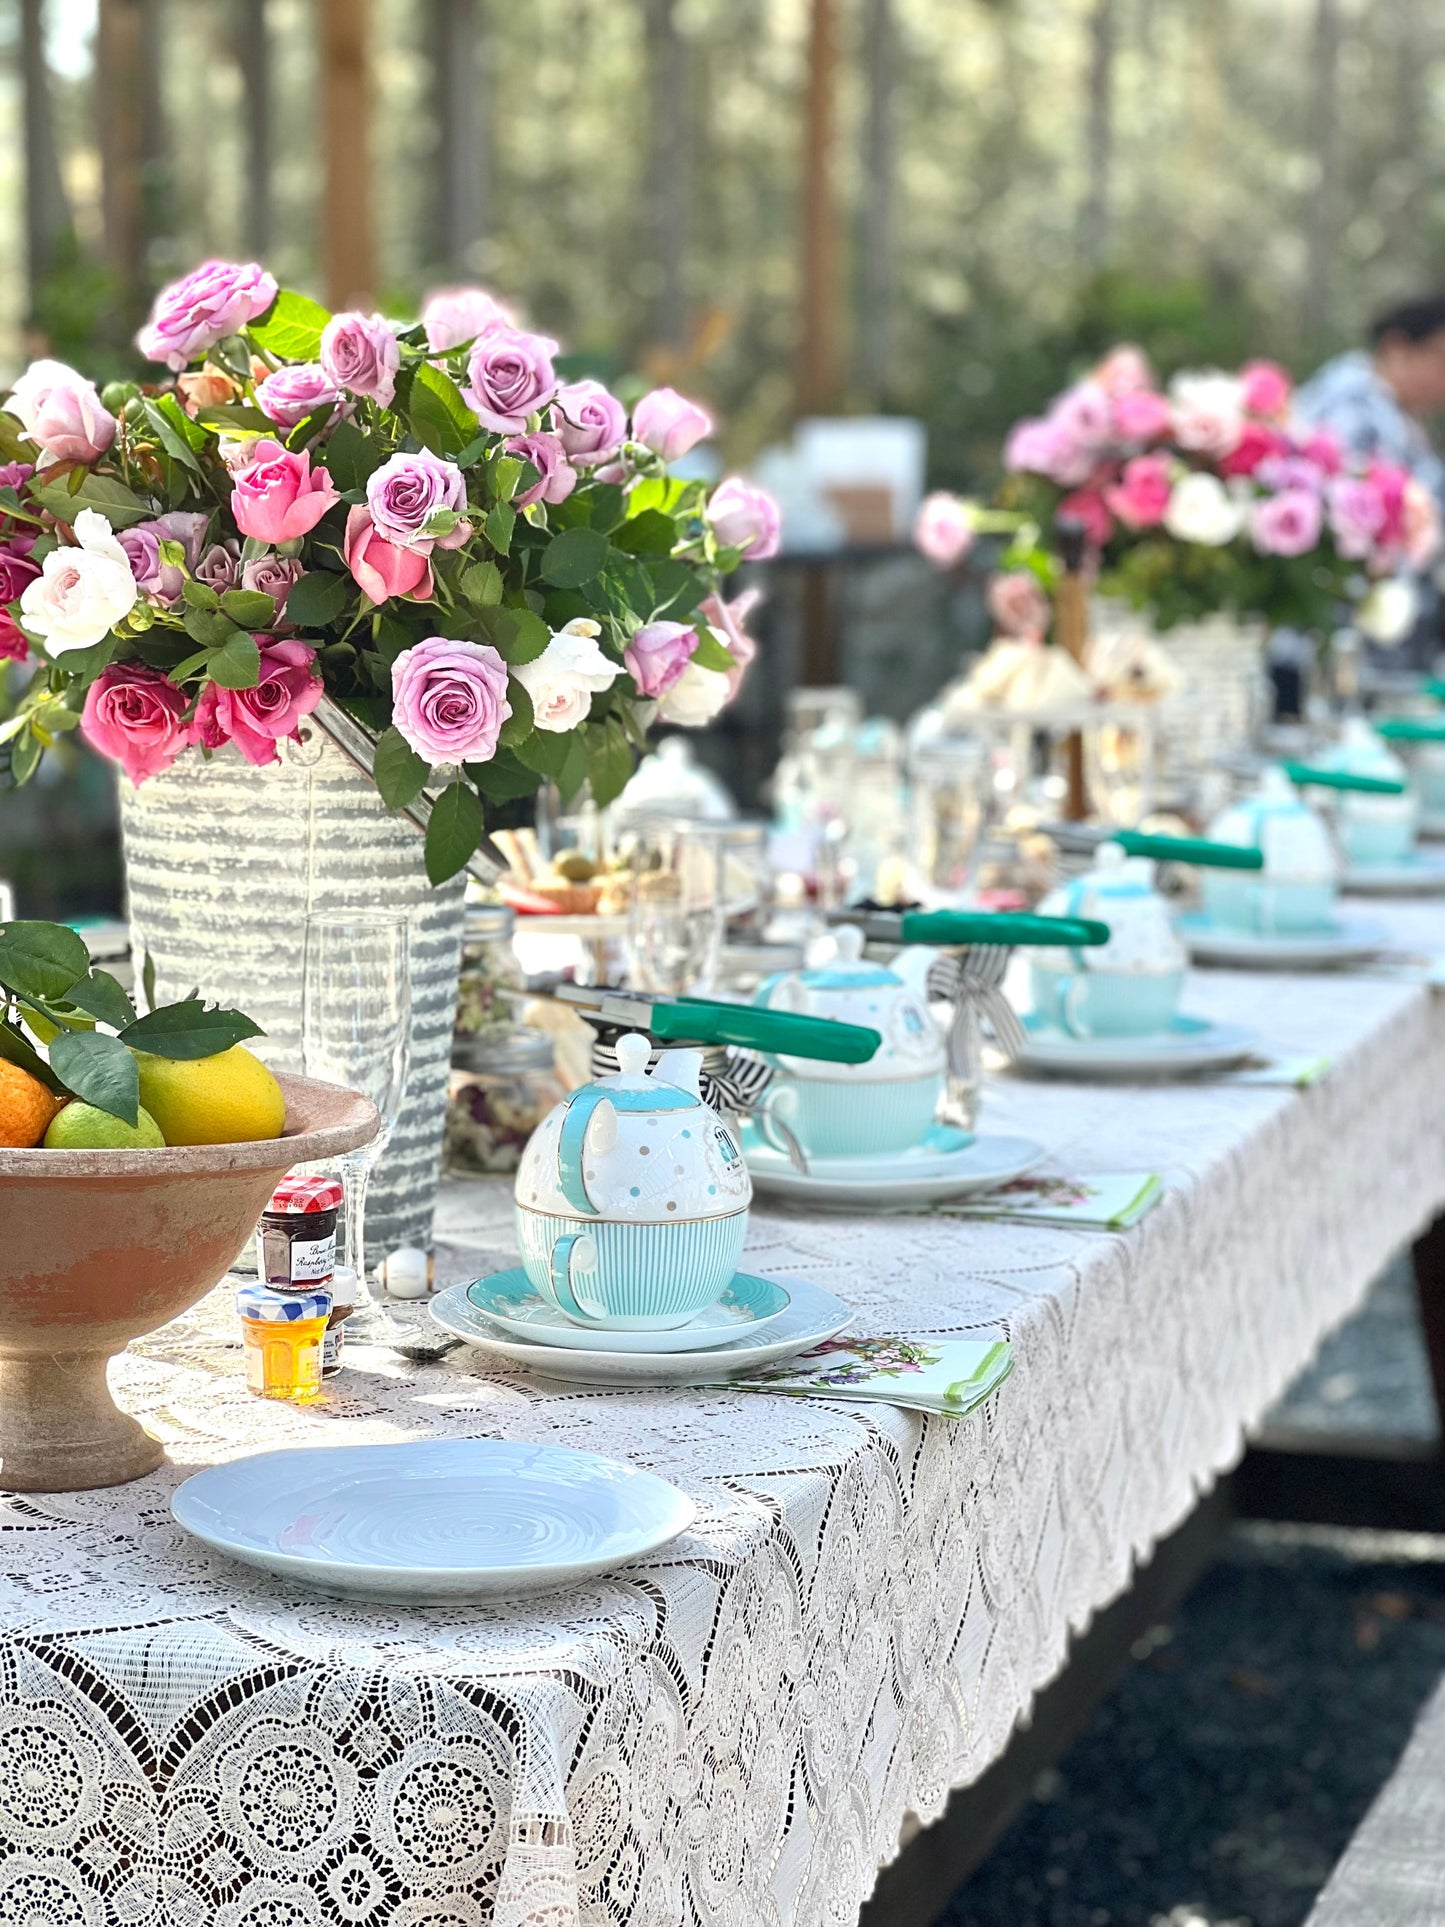 Afternoon Tea & Flower Bar - CHILD TICKET (Ages 3-12 years old)